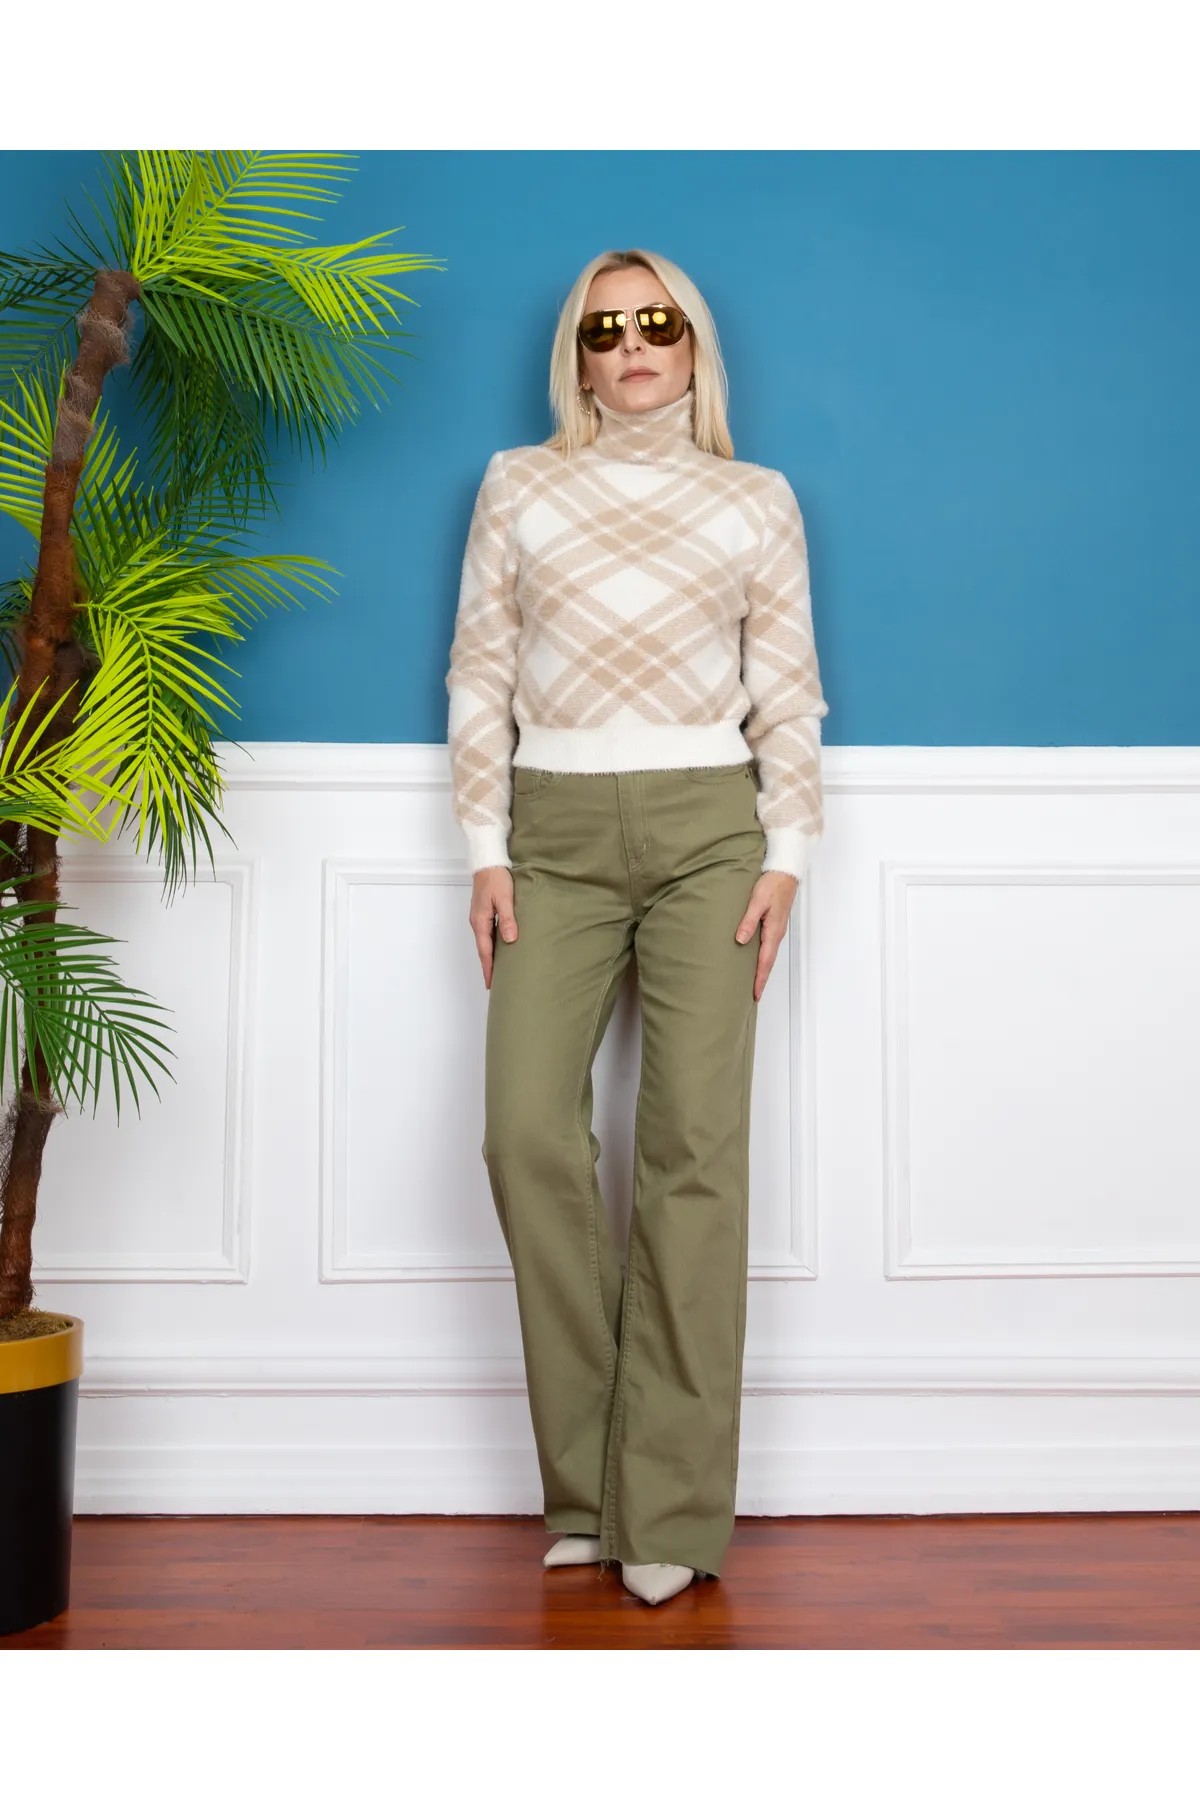 BEIGE WHITE TURTLENKLE COLLAR WITH ELASTIC WAIST CHECK PATTERNED SWEATER